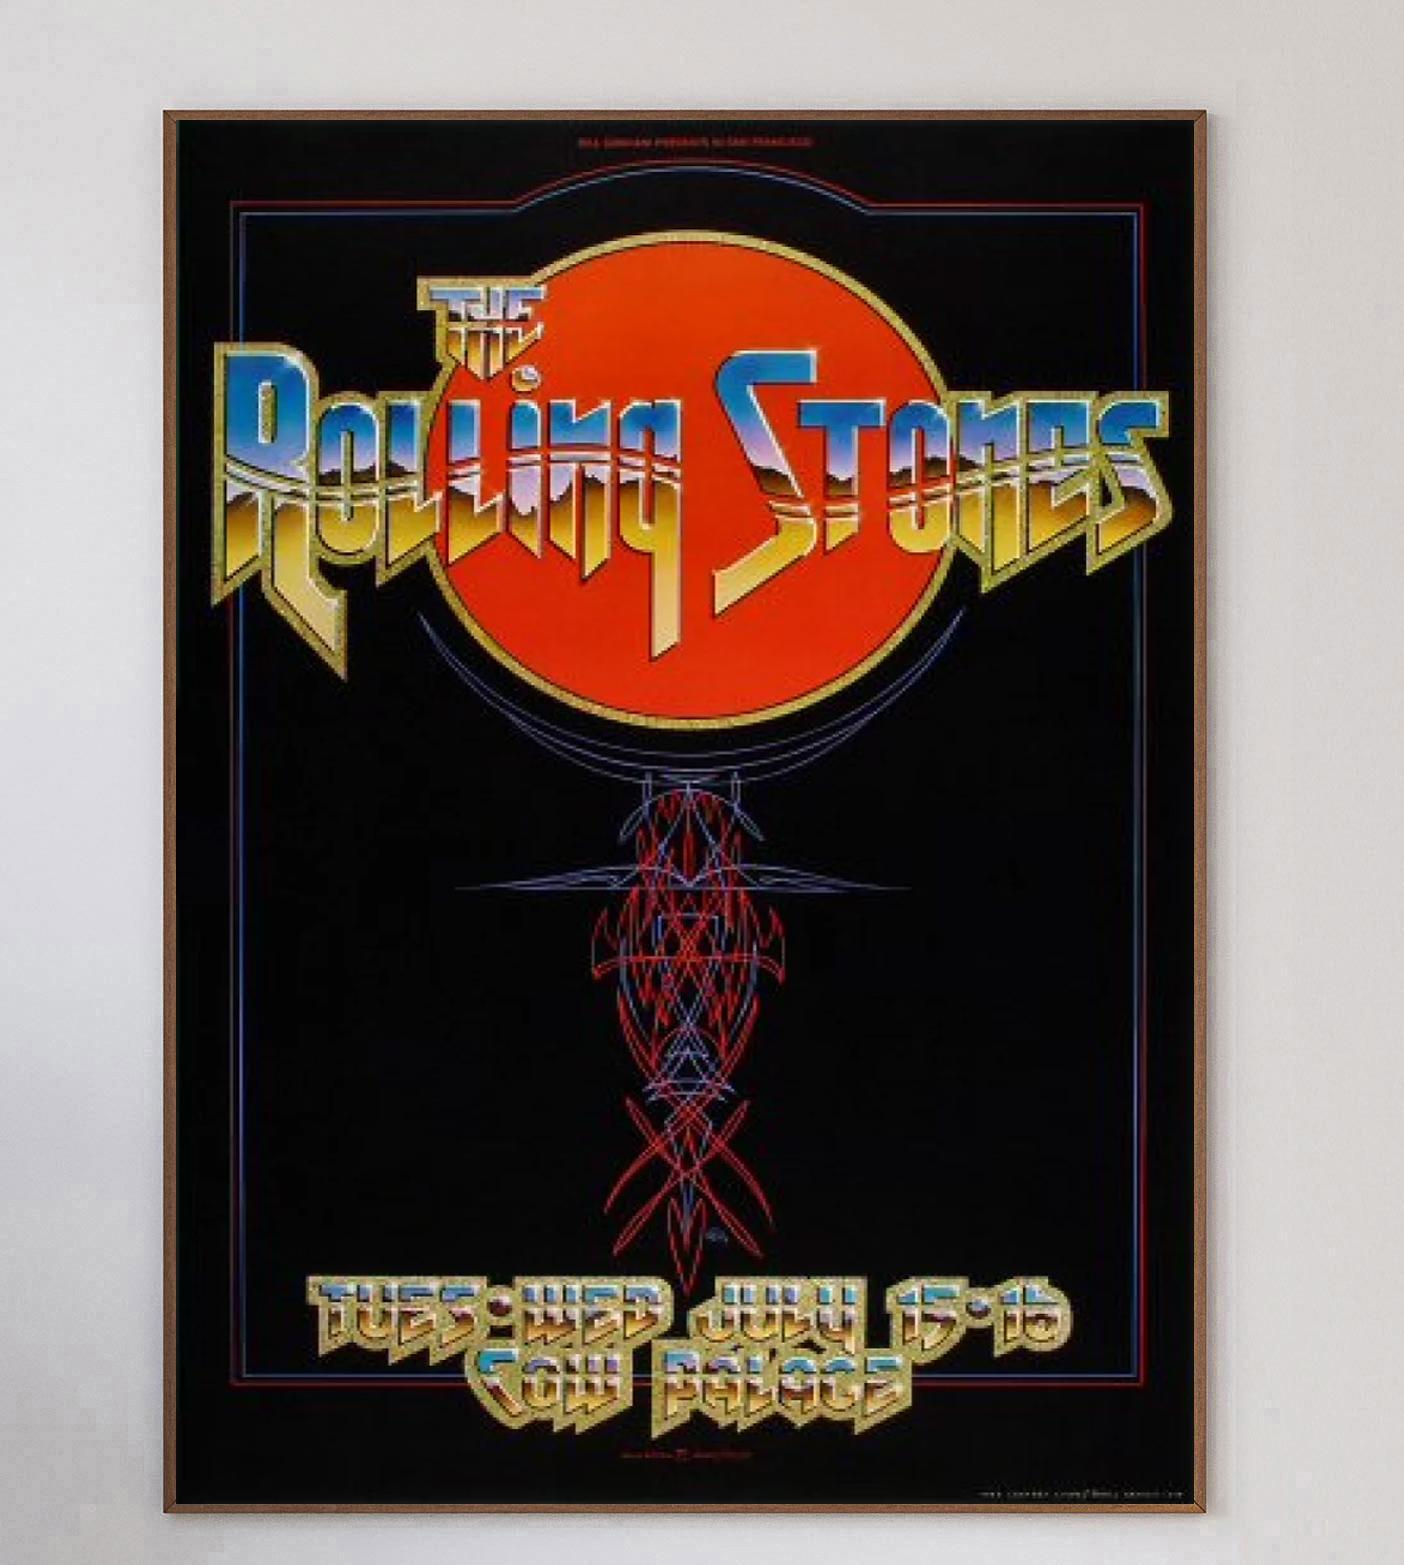 Wonderful poster from The Rolling Stones' concerts at the iconic Cow Palace in California, USA. Presented by Bill Graham, the concert were held July 15 & 16th and were a part of the Stones' 